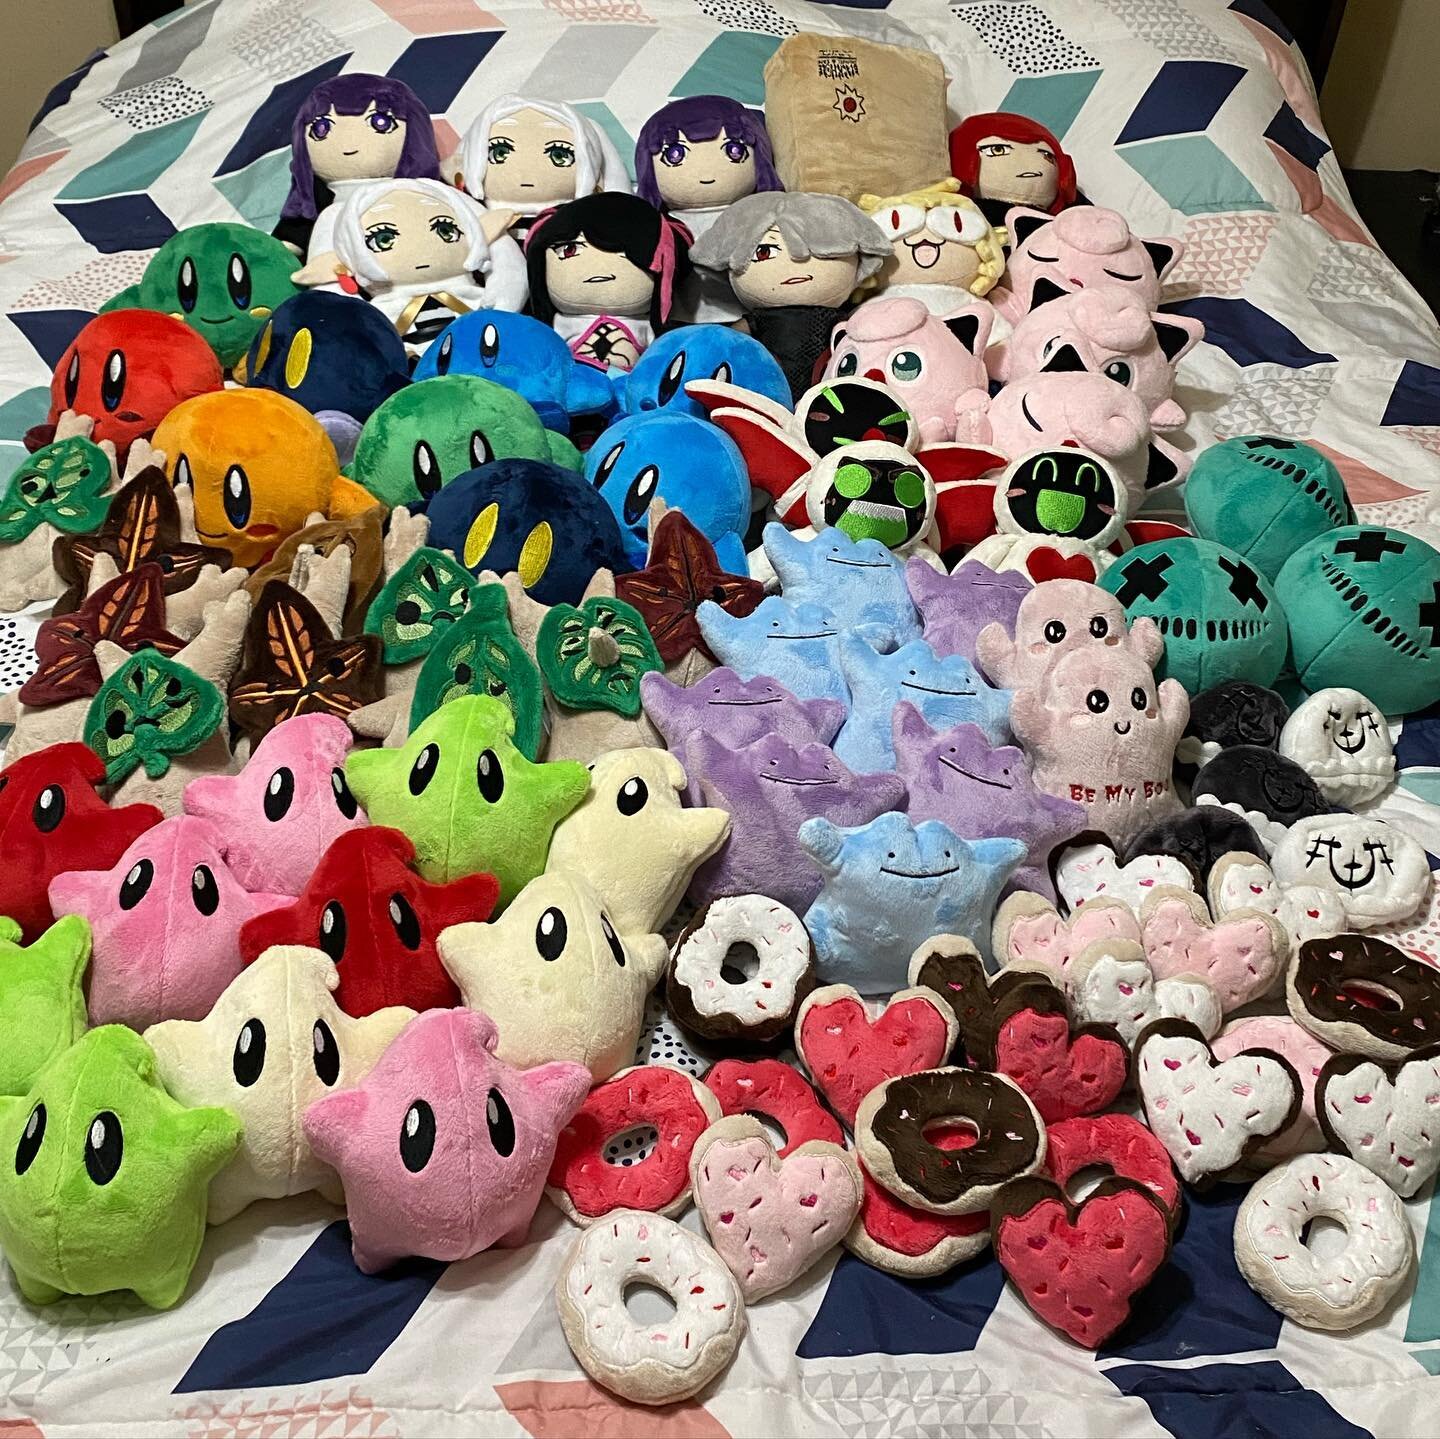 Plushies for Otakufests holiday special event tomorrow~~ I&rsquo;ll be in the Artist alley at booth C2

Going to finish some more chibis but aside from Lumas I&rsquo;m good with small items ^_^ 

Also why does Instagram look so different for posting?